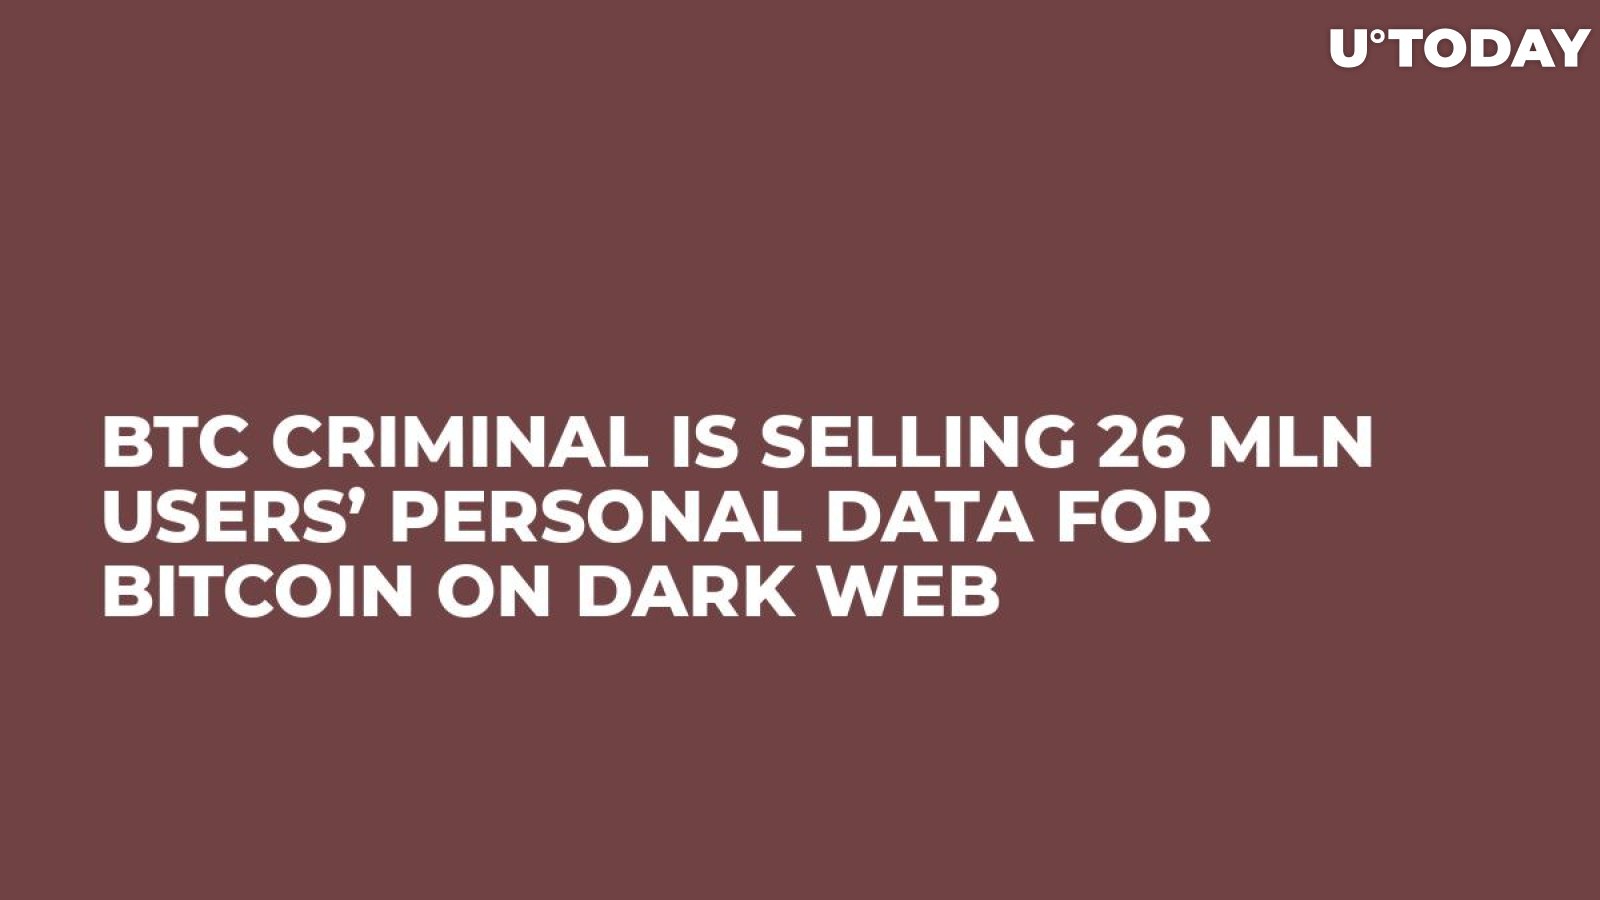 BTC Criminal Is Selling 26 Mln Users’ Personal Data for Bitcoin on Dark Web